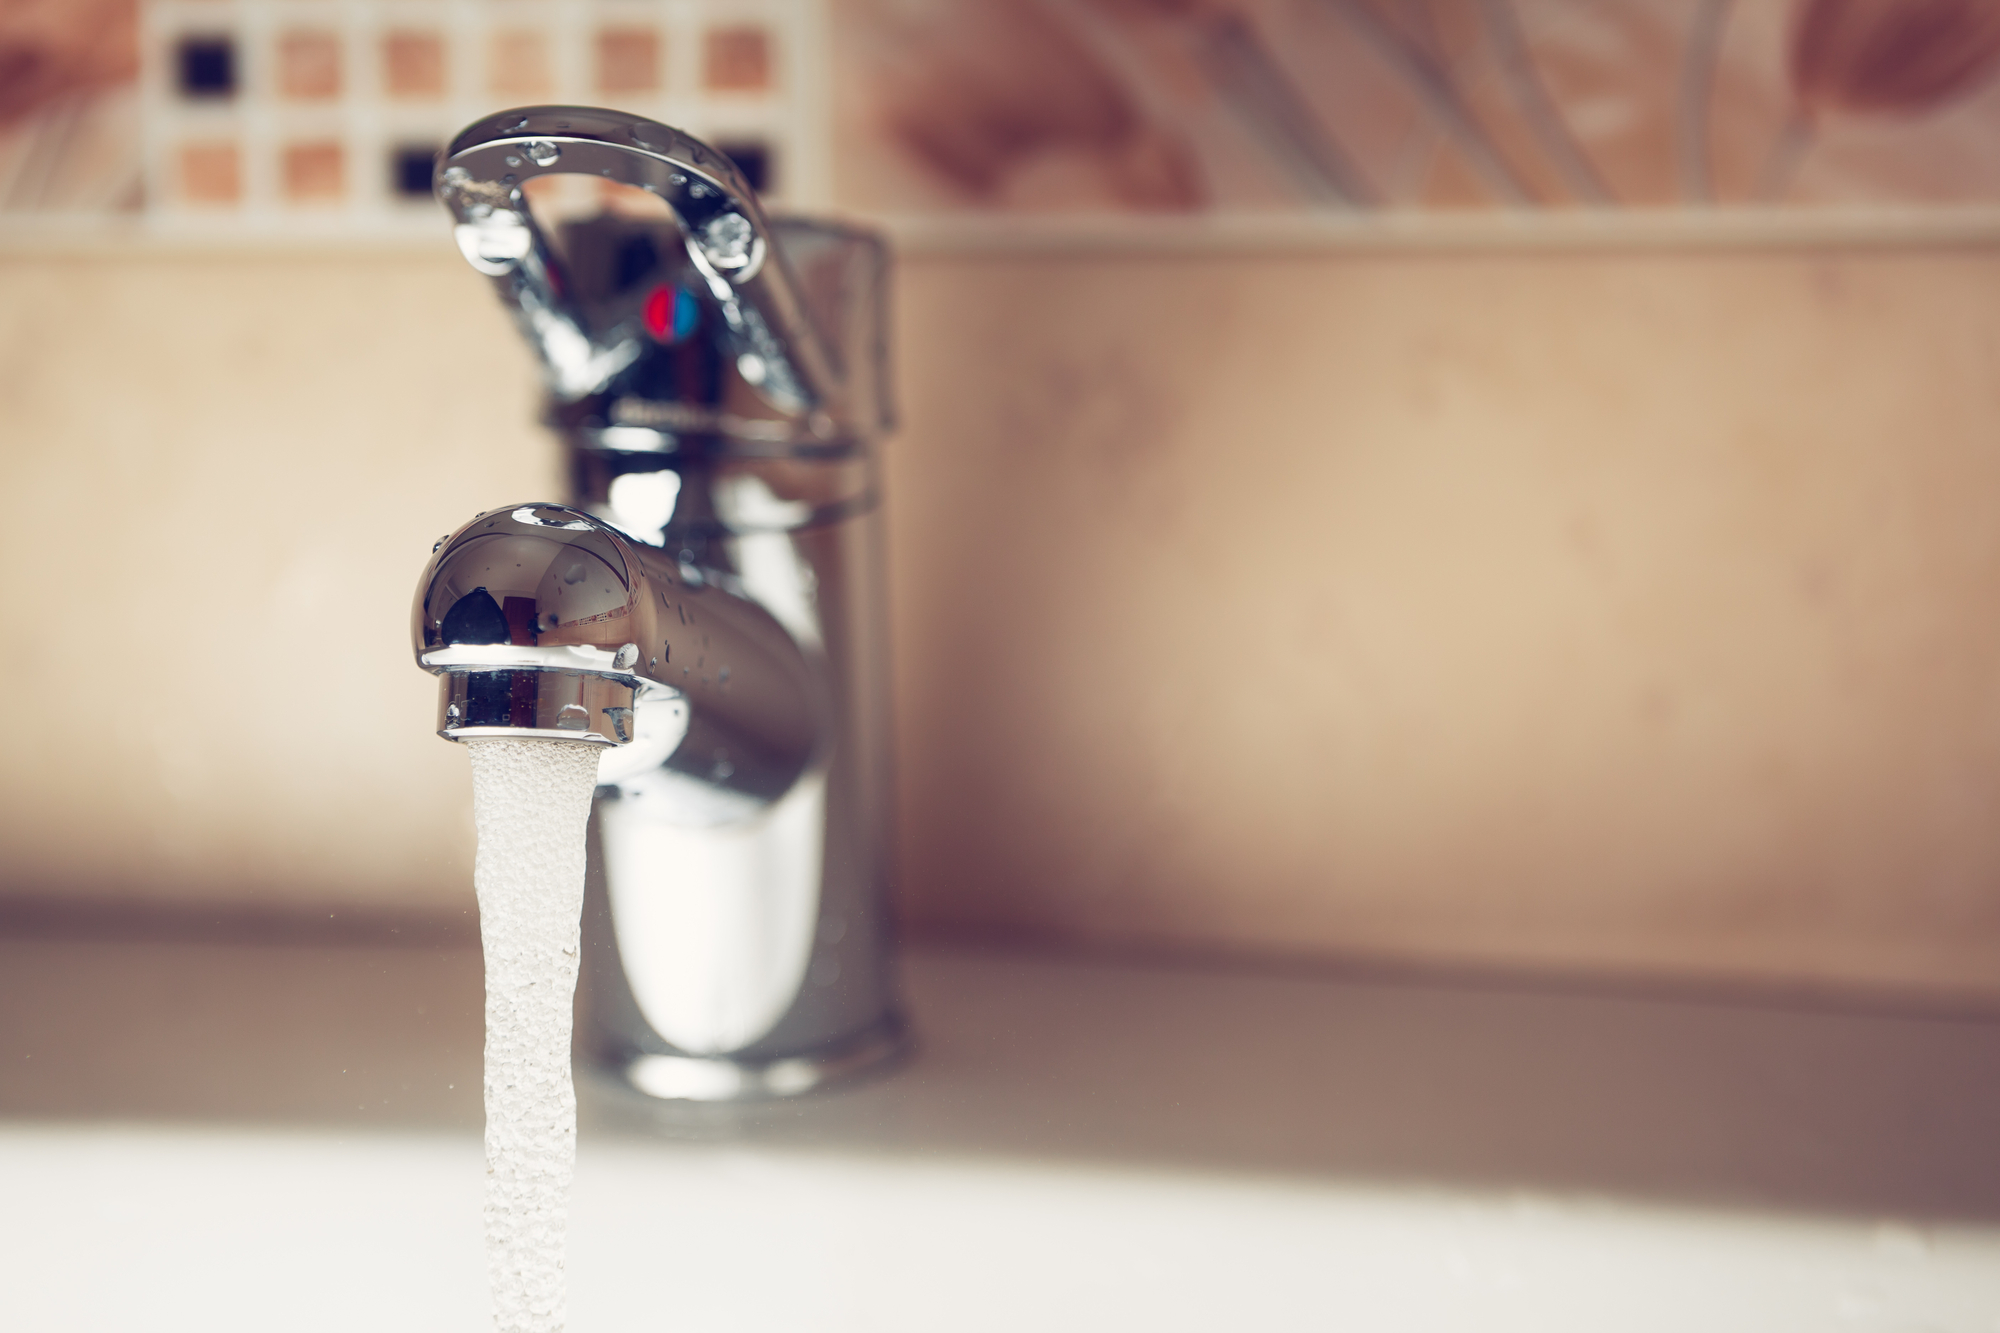 Common Plumbing Issues and How to Prevent Them